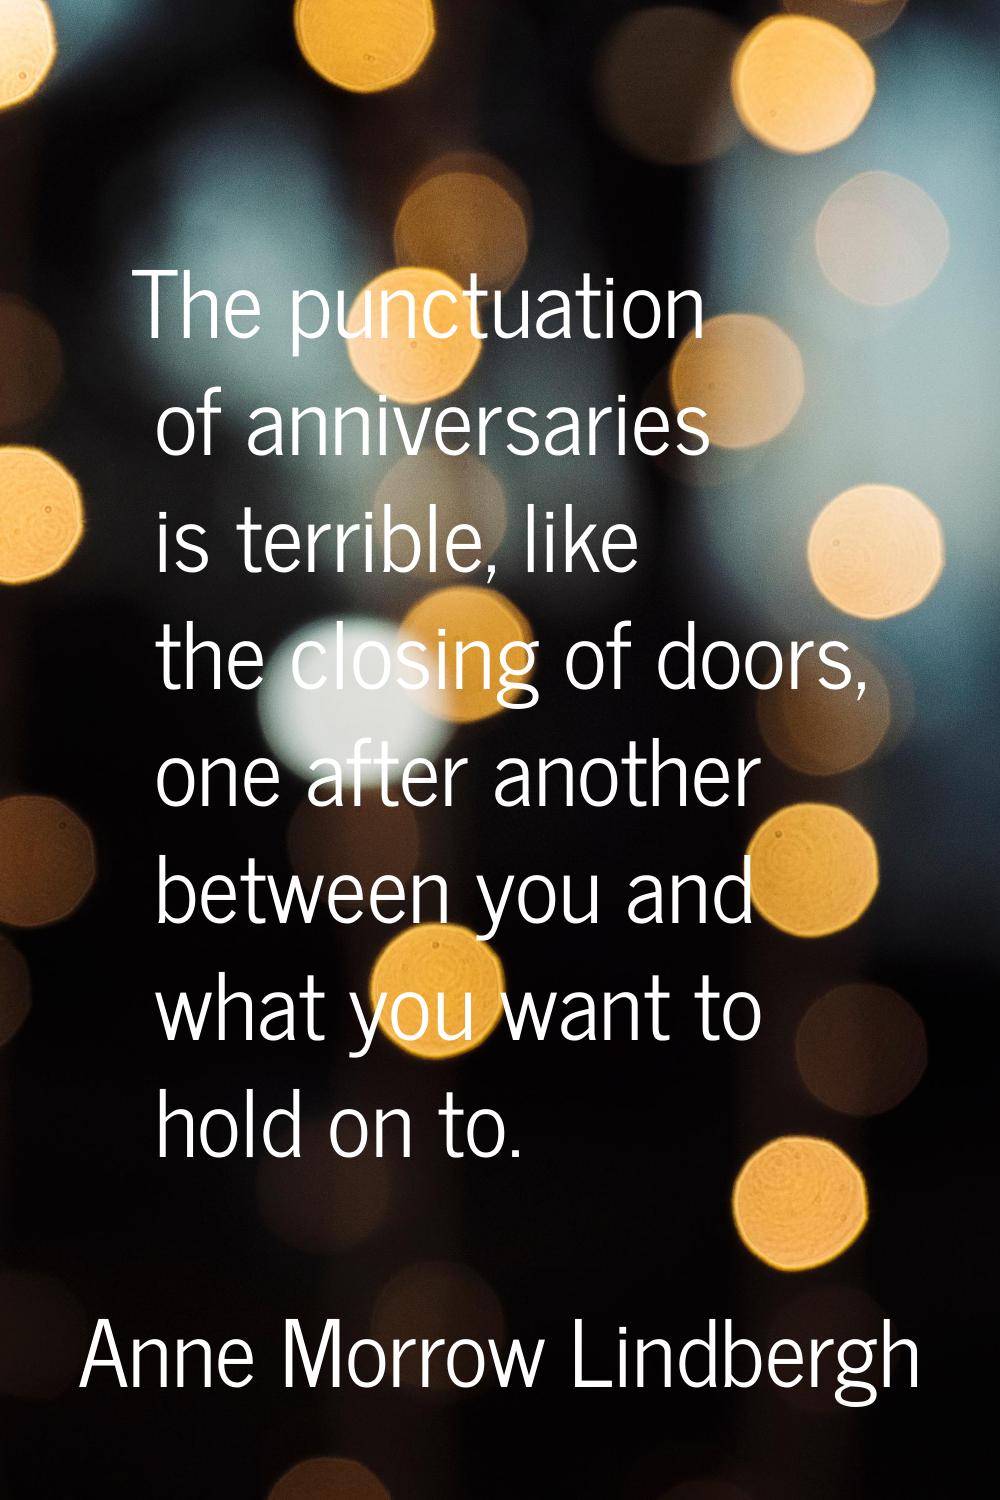 The punctuation of anniversaries is terrible, like the closing of doors, one after another between 